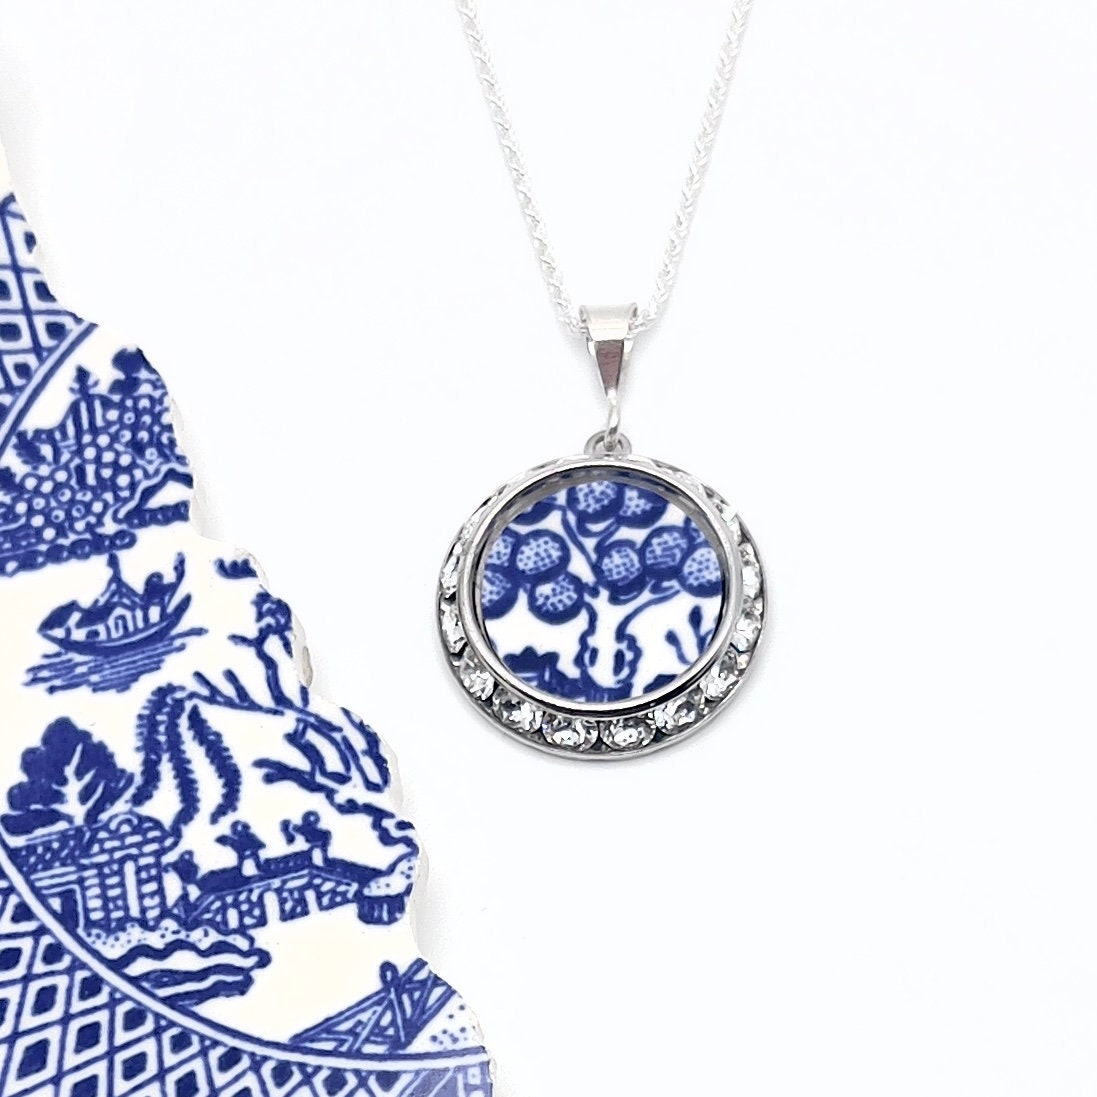 Blue Willow Tree Necklace, Mid Century China Jewelry, Unique Gifts for Women, 9th and 20th Anniversary Gifts, Crystal Necklace, Willow Ware